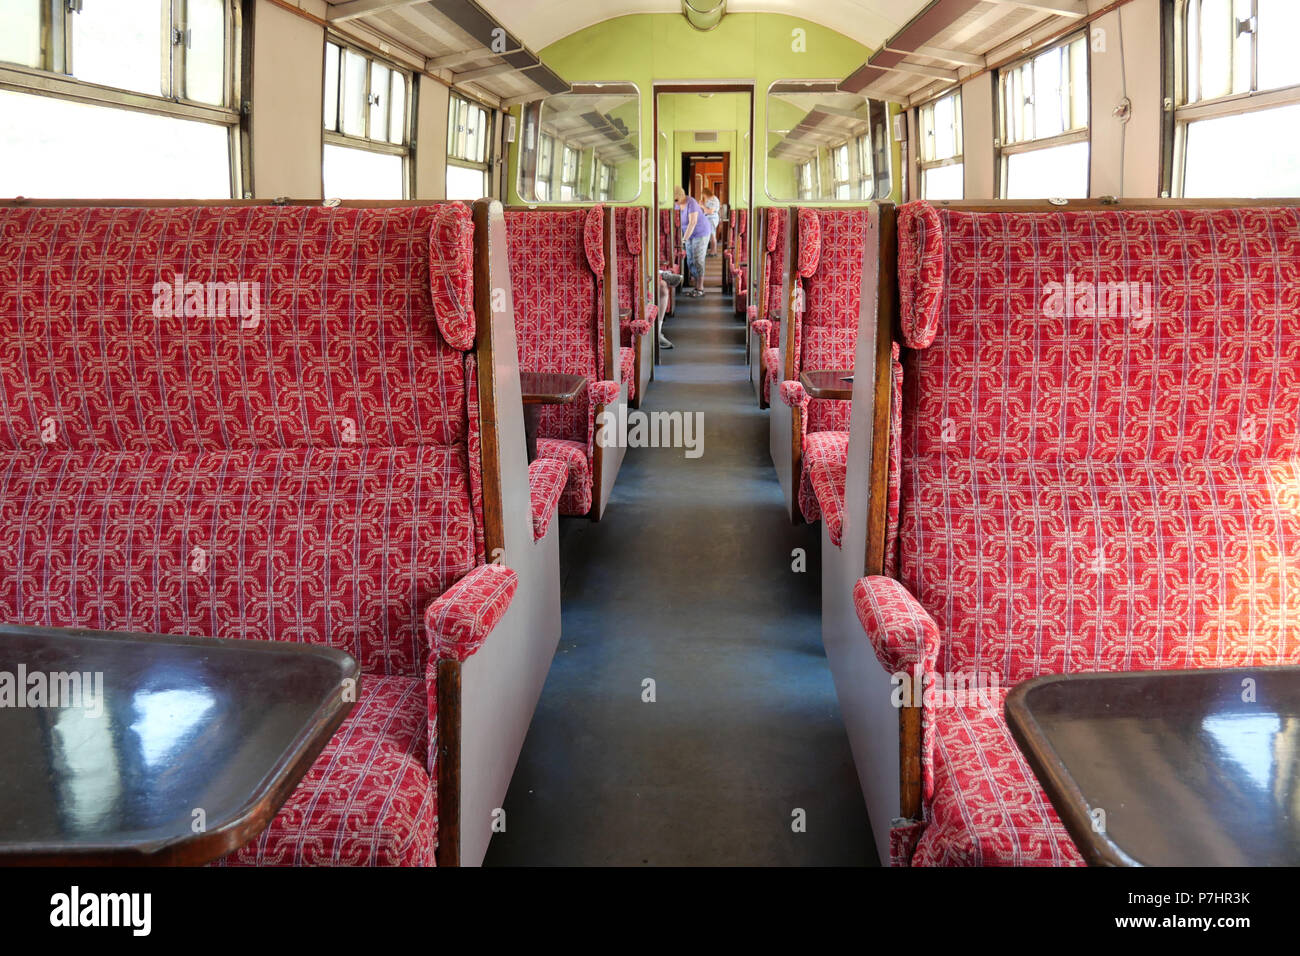 Passenger Carriage with people being seated and chatting. July 03 2018 - Carrog, Wales, UK. - Rail Station. Stock Photo